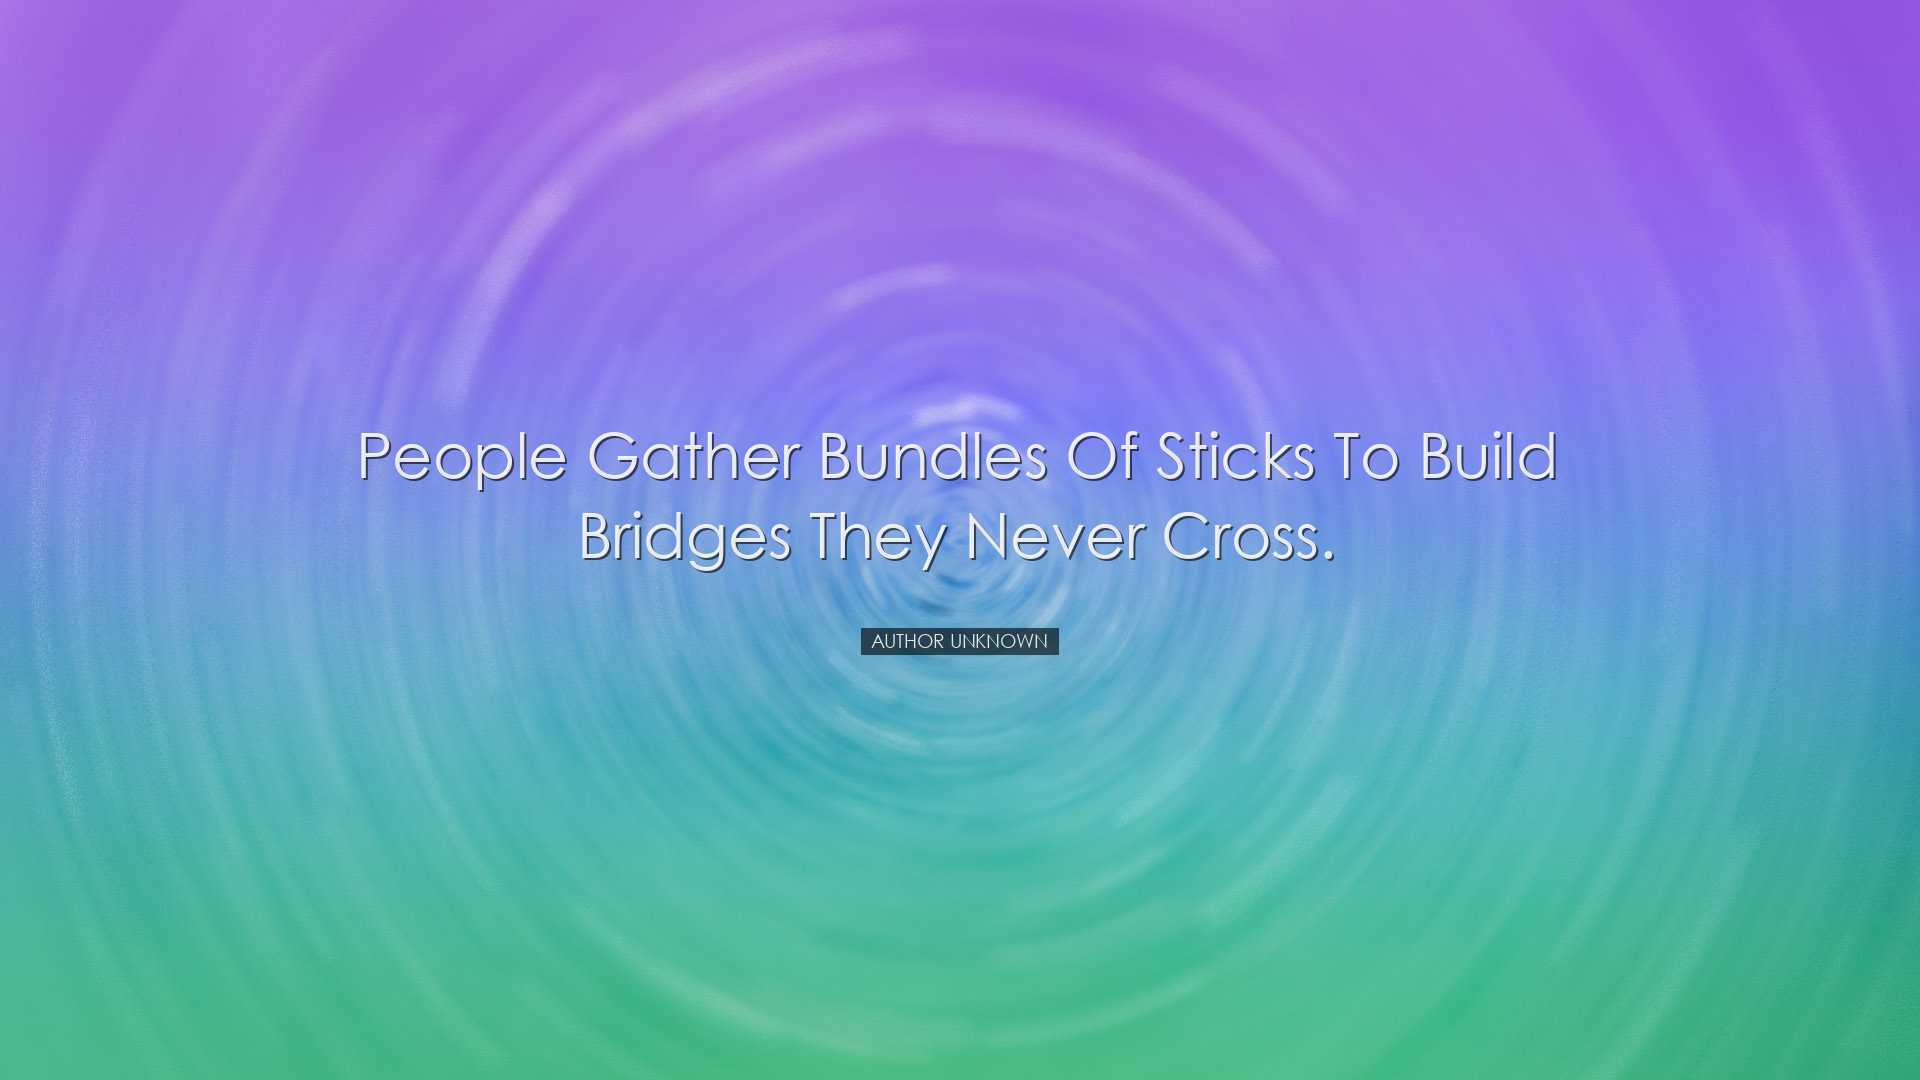 People gather bundles of sticks to build bridges they never cross.